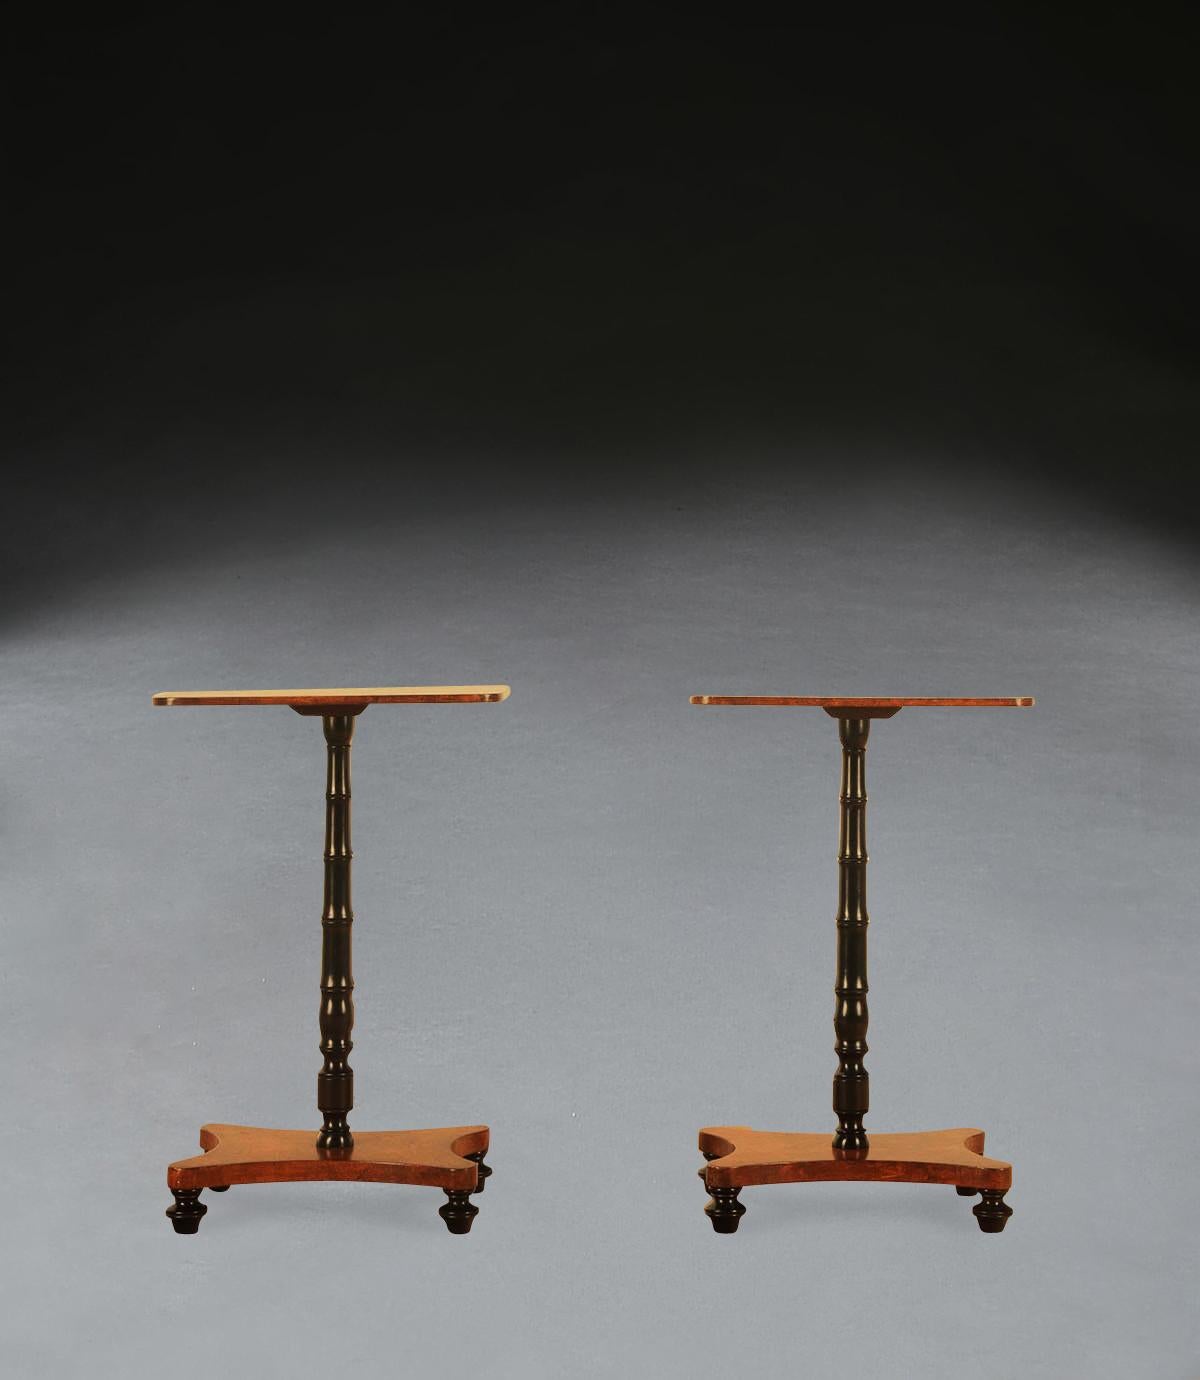 A stylish pair of early C20th occasional/end tables, with elegant burr elm tops raised on elegant column supports and terminating in concave burr elm platform bases, above ebonised turned feet. Circa 1900. Excellent condition and timber.

H: 76 cm